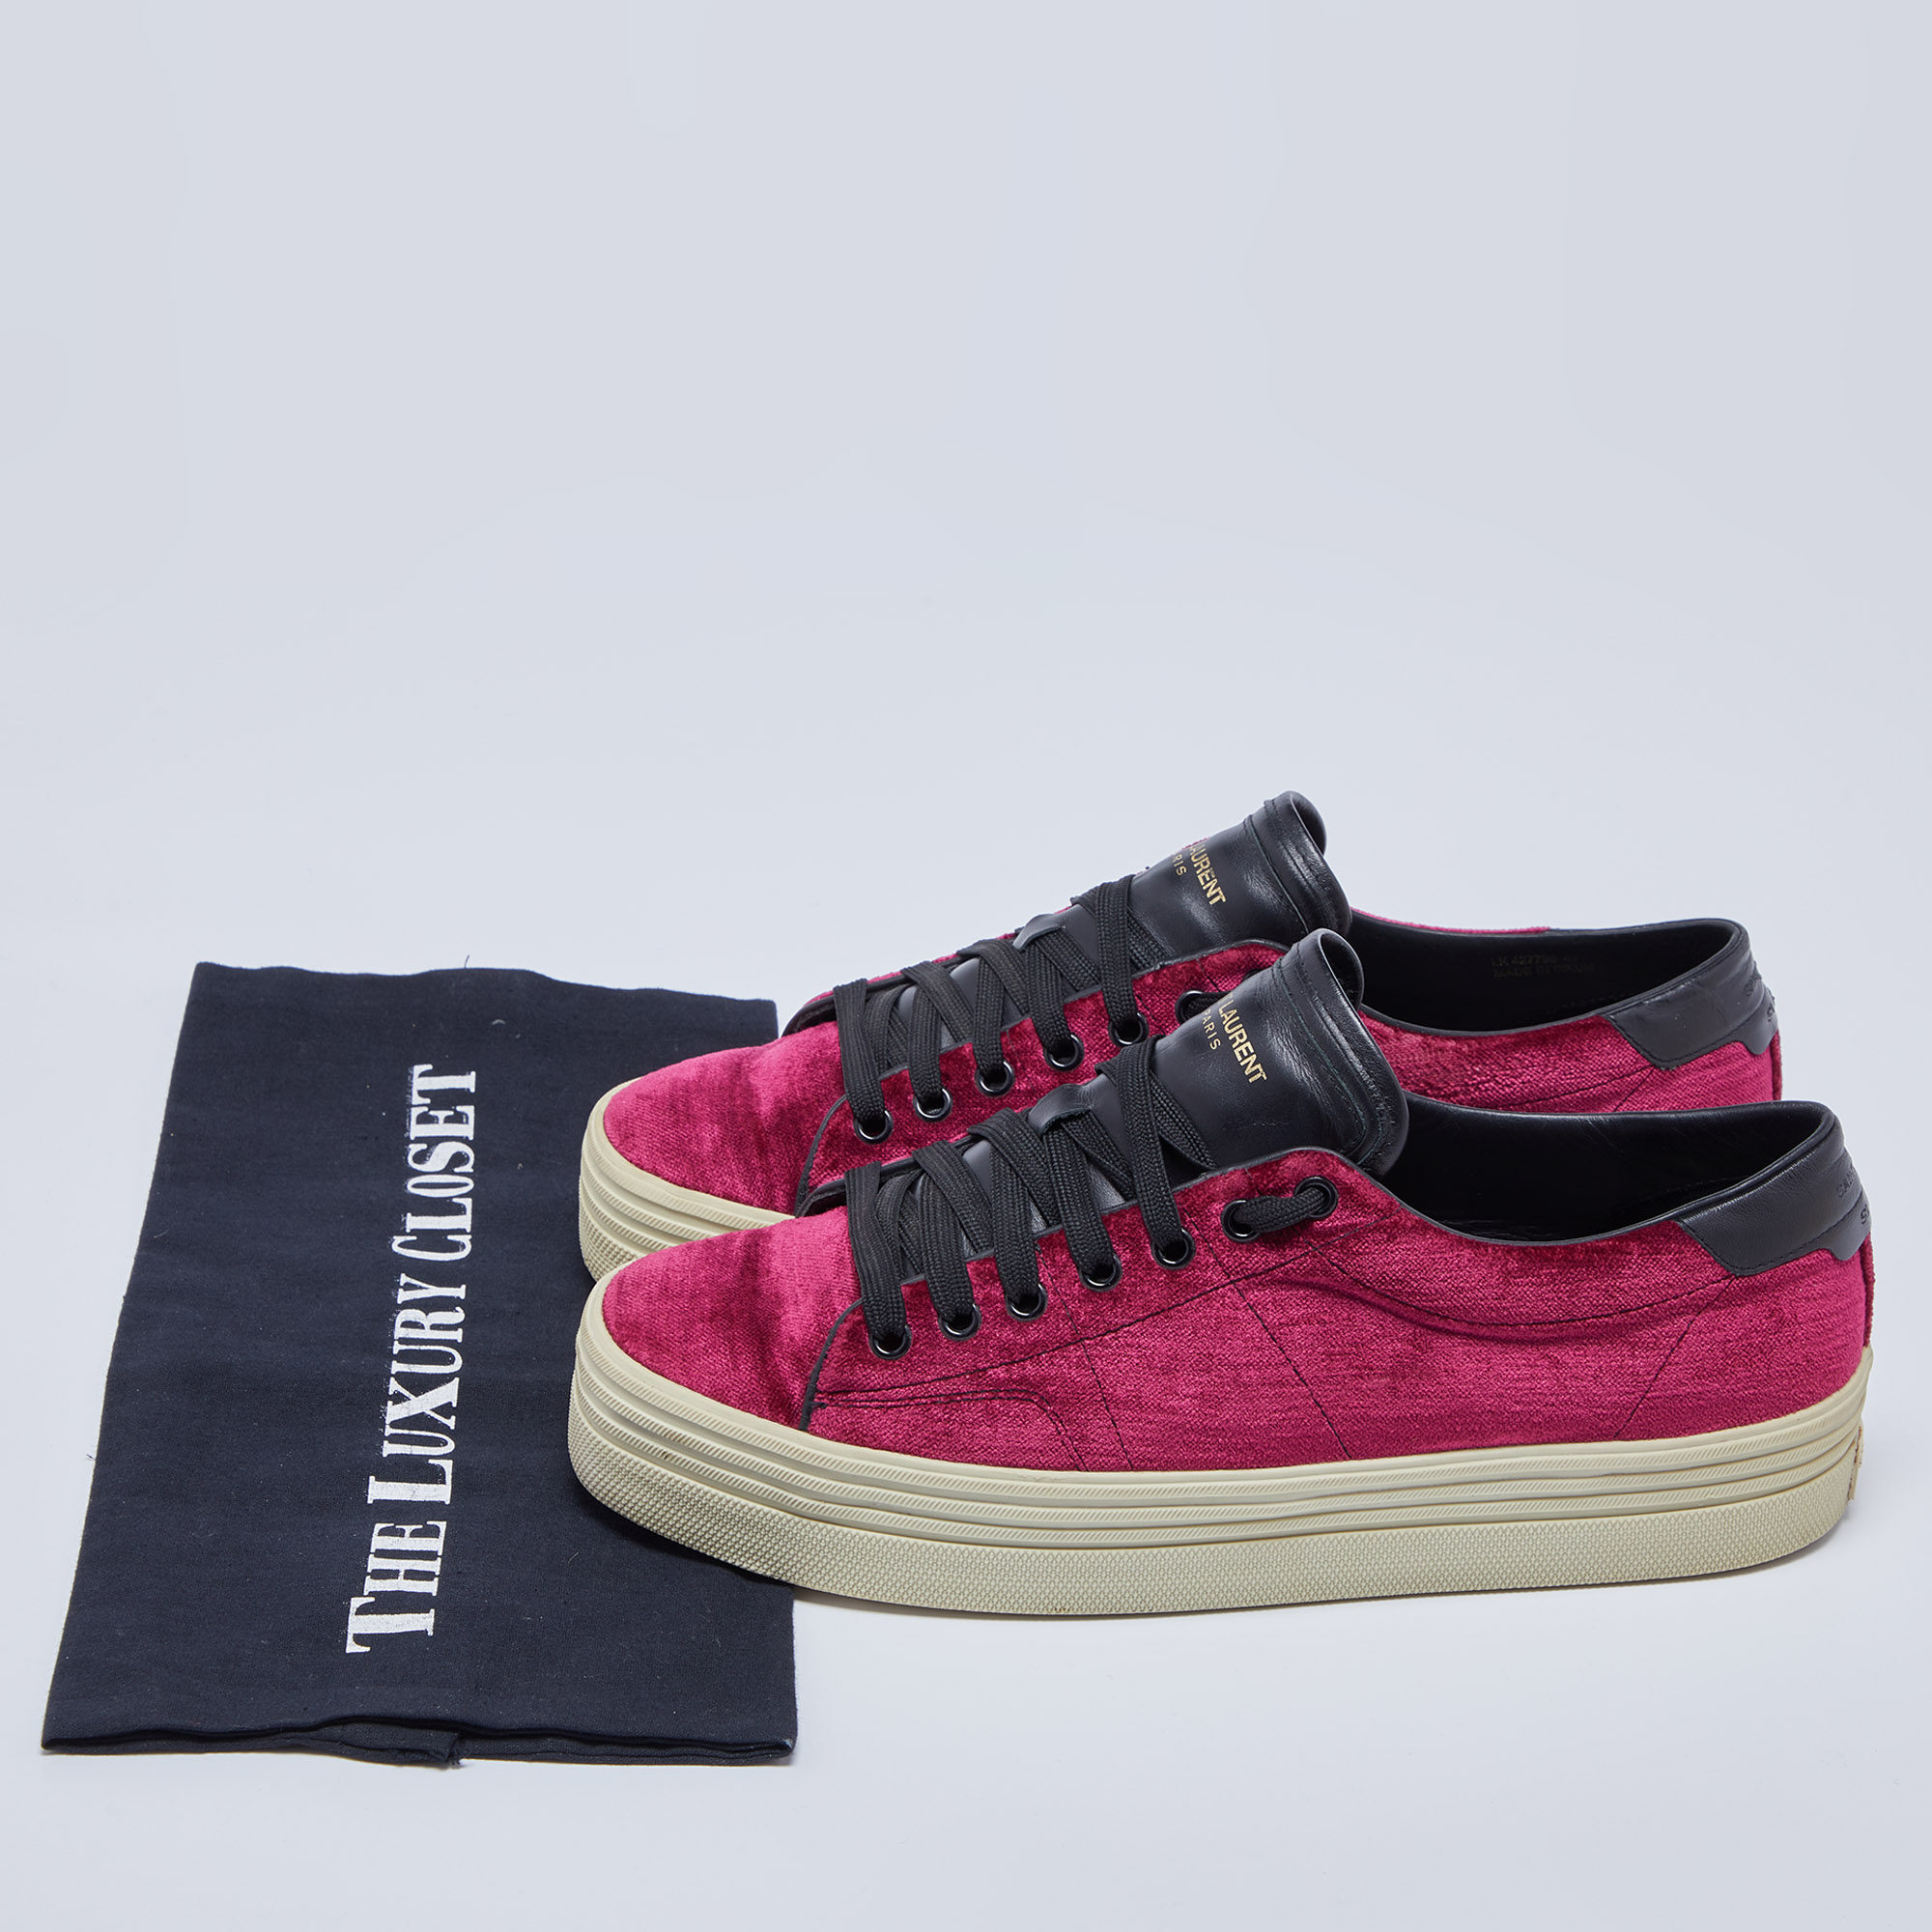 Saint Laurent Burgundy Velvet And Leather Low Top Sneakers Size 41